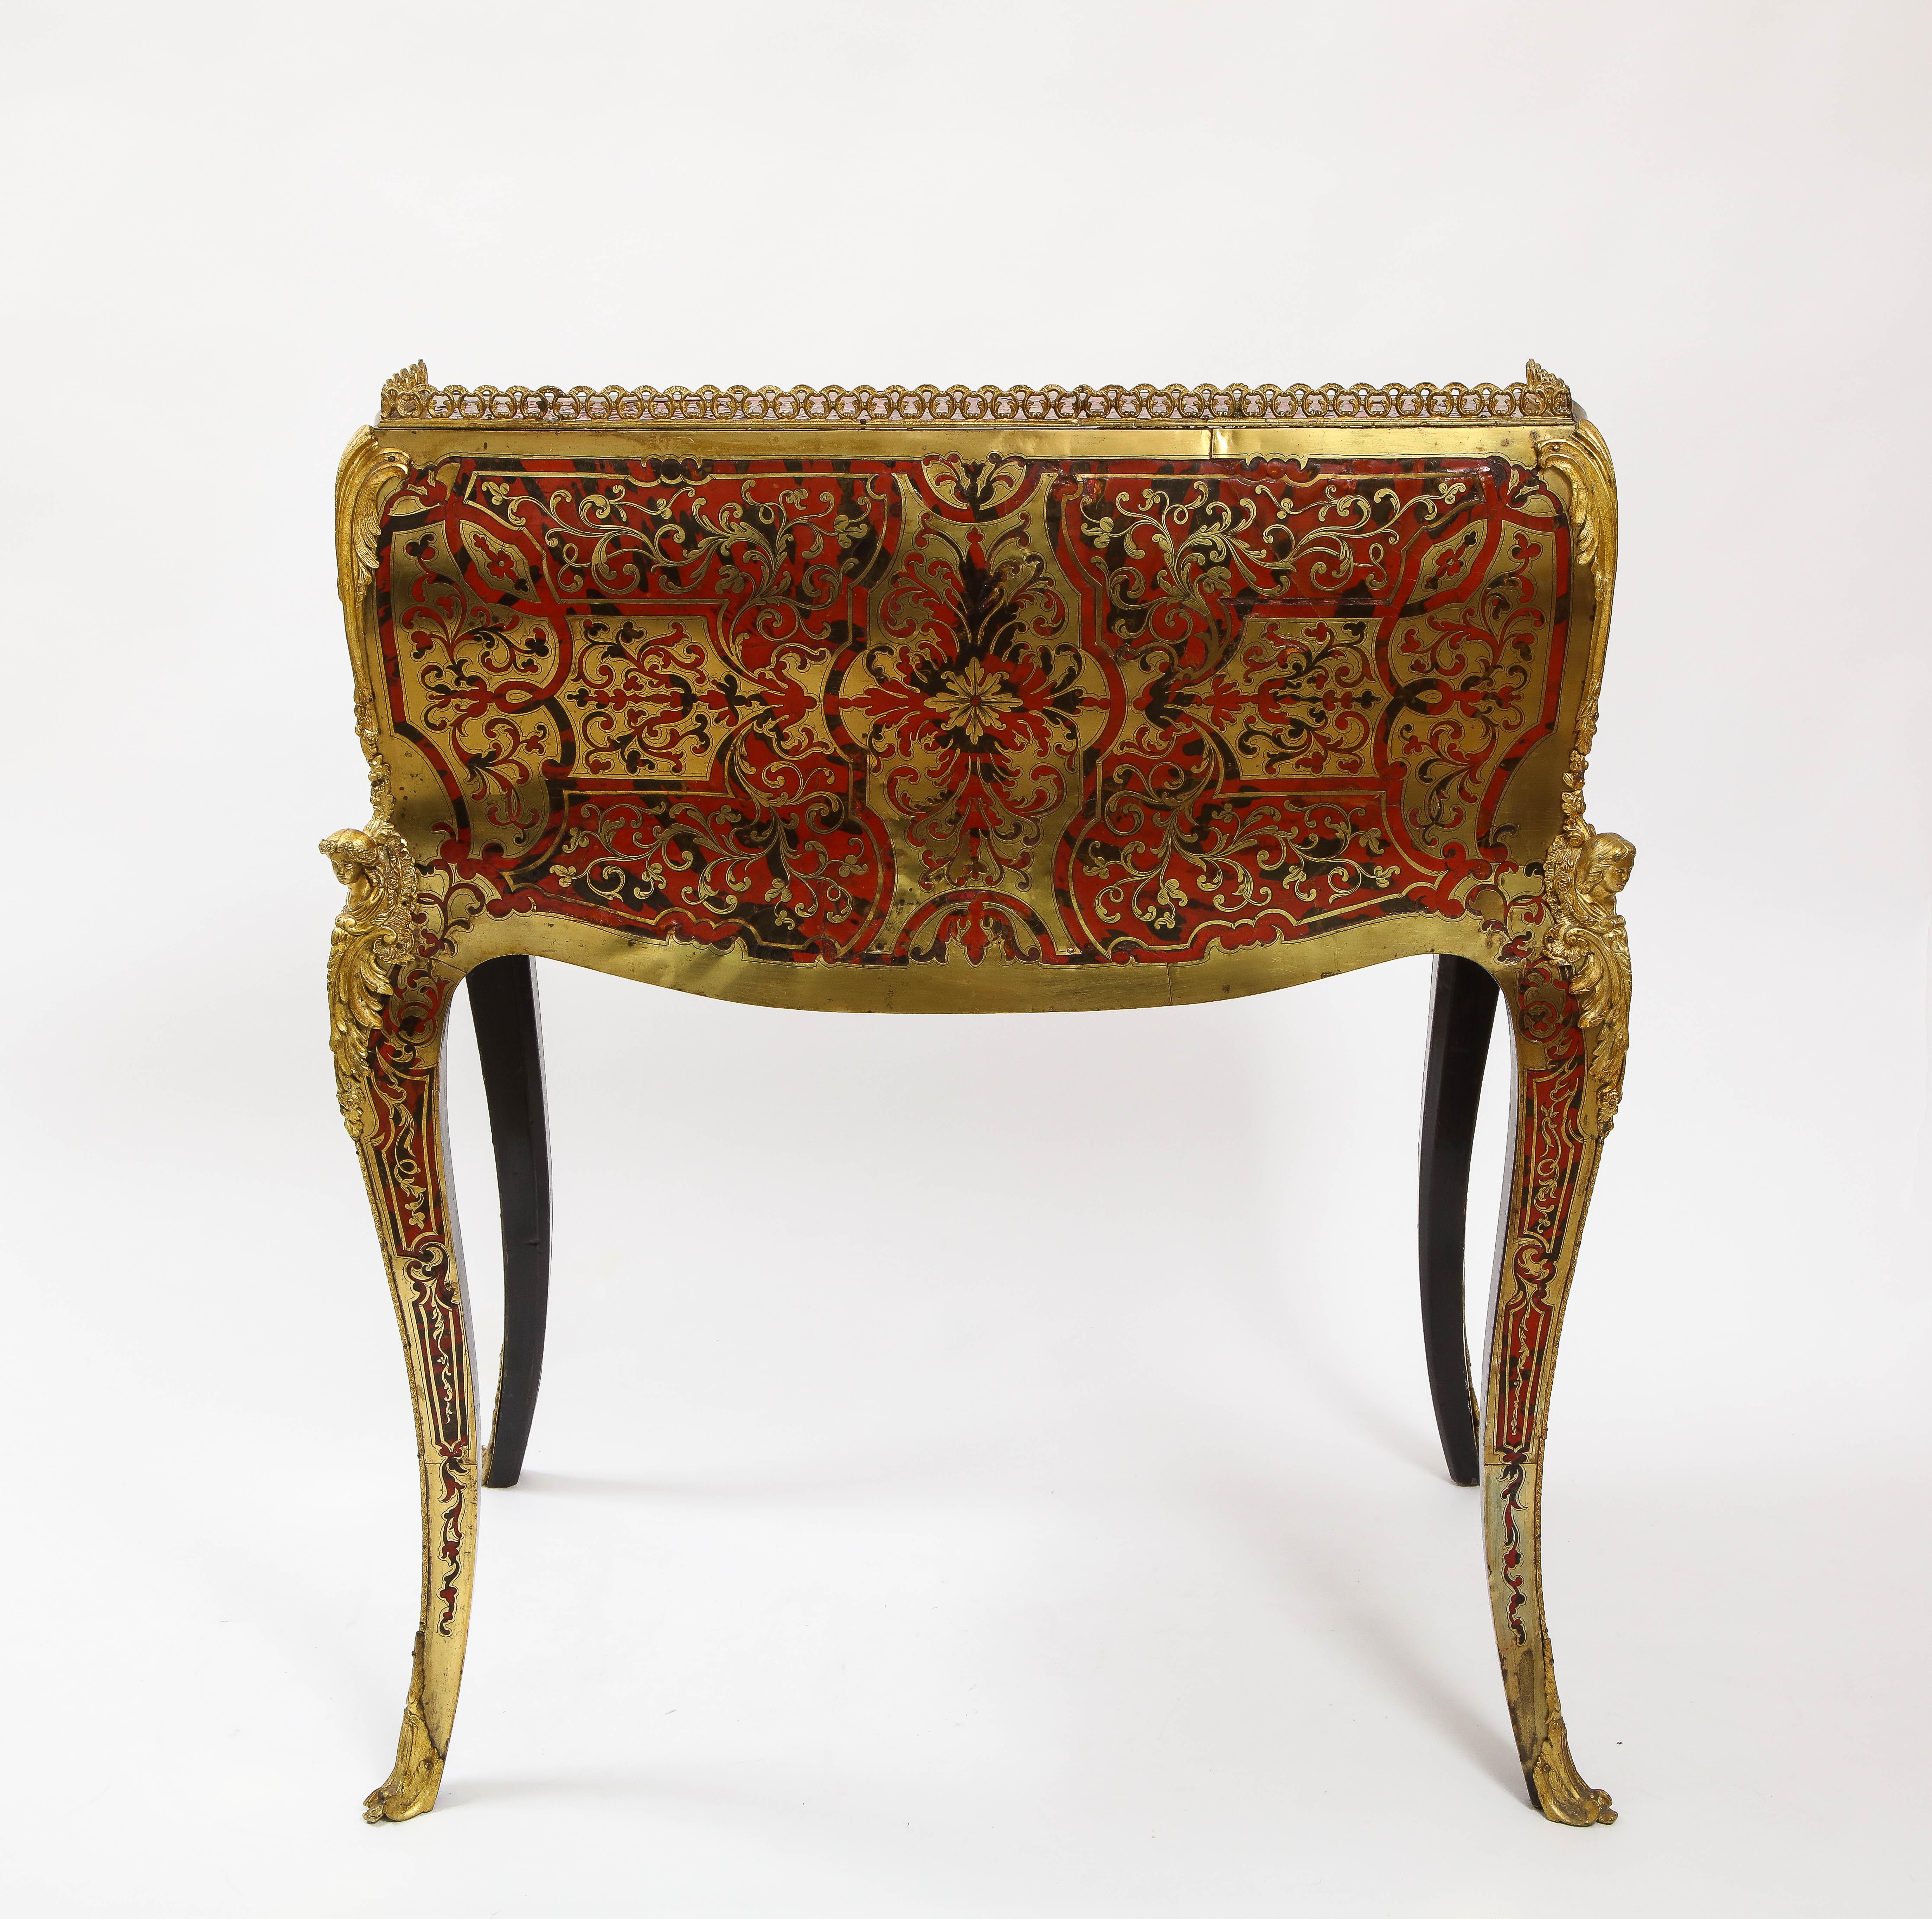 French Louis XV Style Dore Bronze Mounted Boulle Marquetry Secretary Desk or Cabinet For Sale